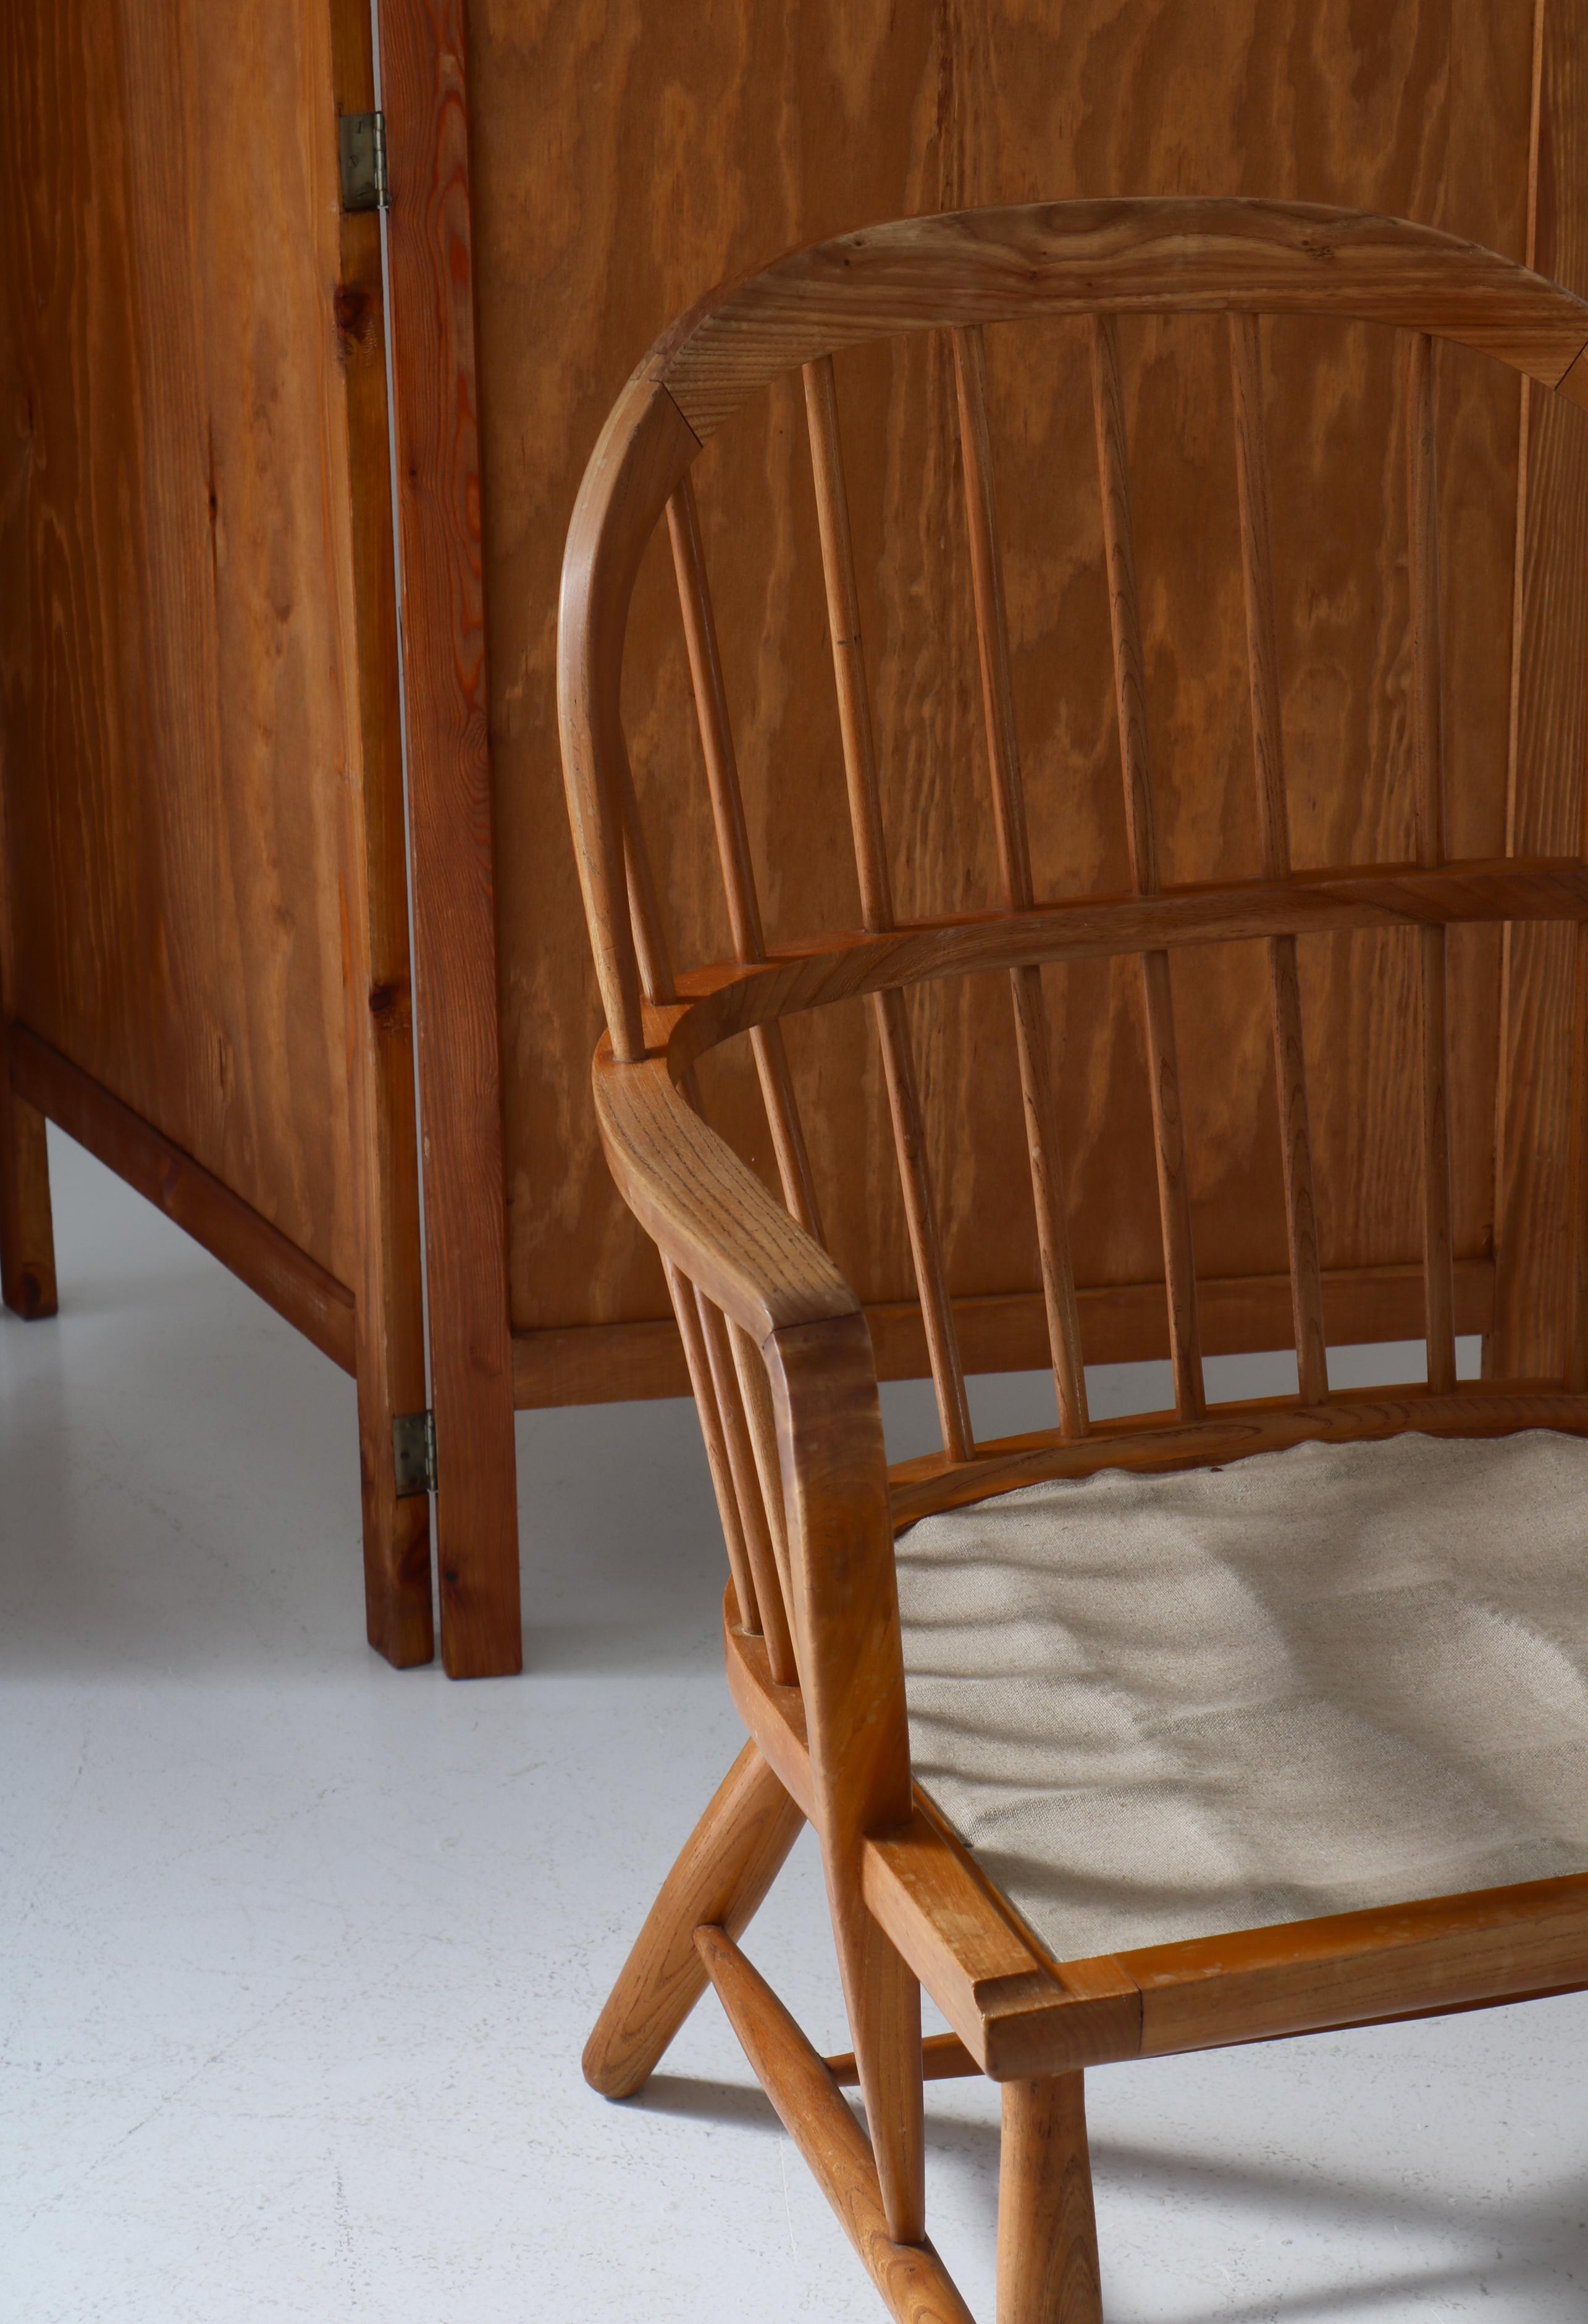 Scandinavian Modern Windsor Chair in Patinated Ash and White Bouclé, 1940s For Sale 12